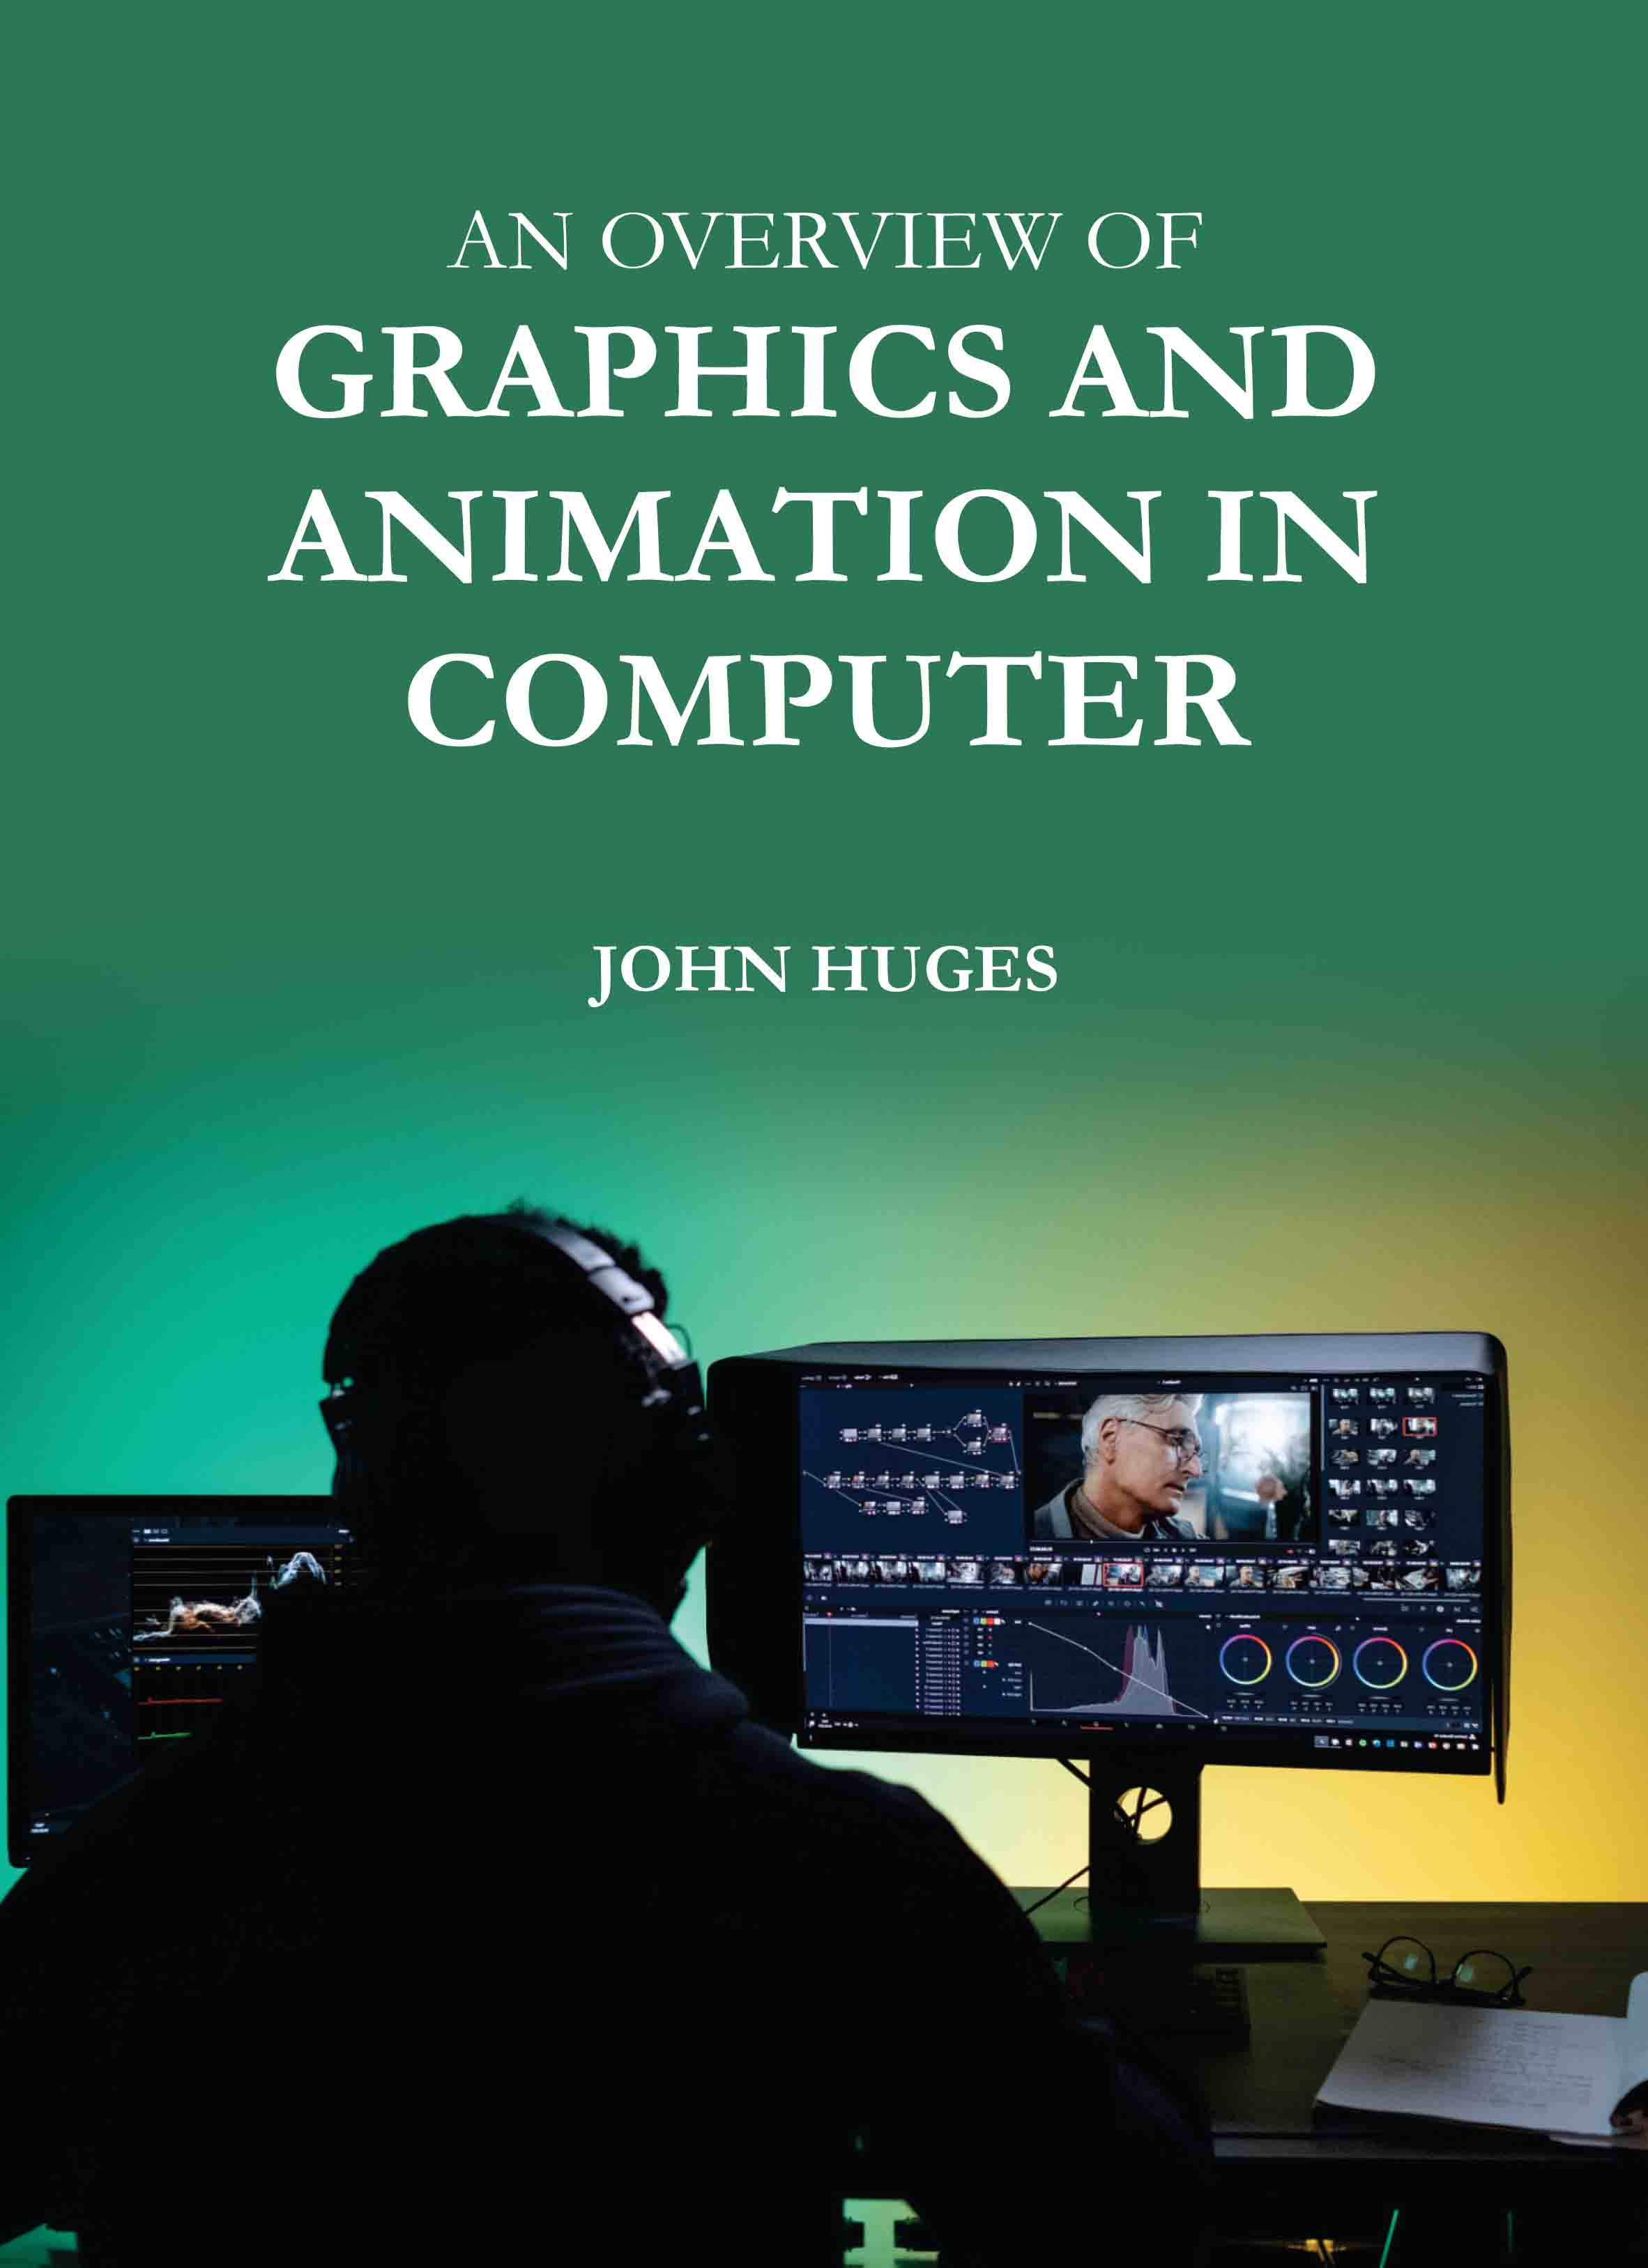 An Overview of Graphics and Animation in Computer